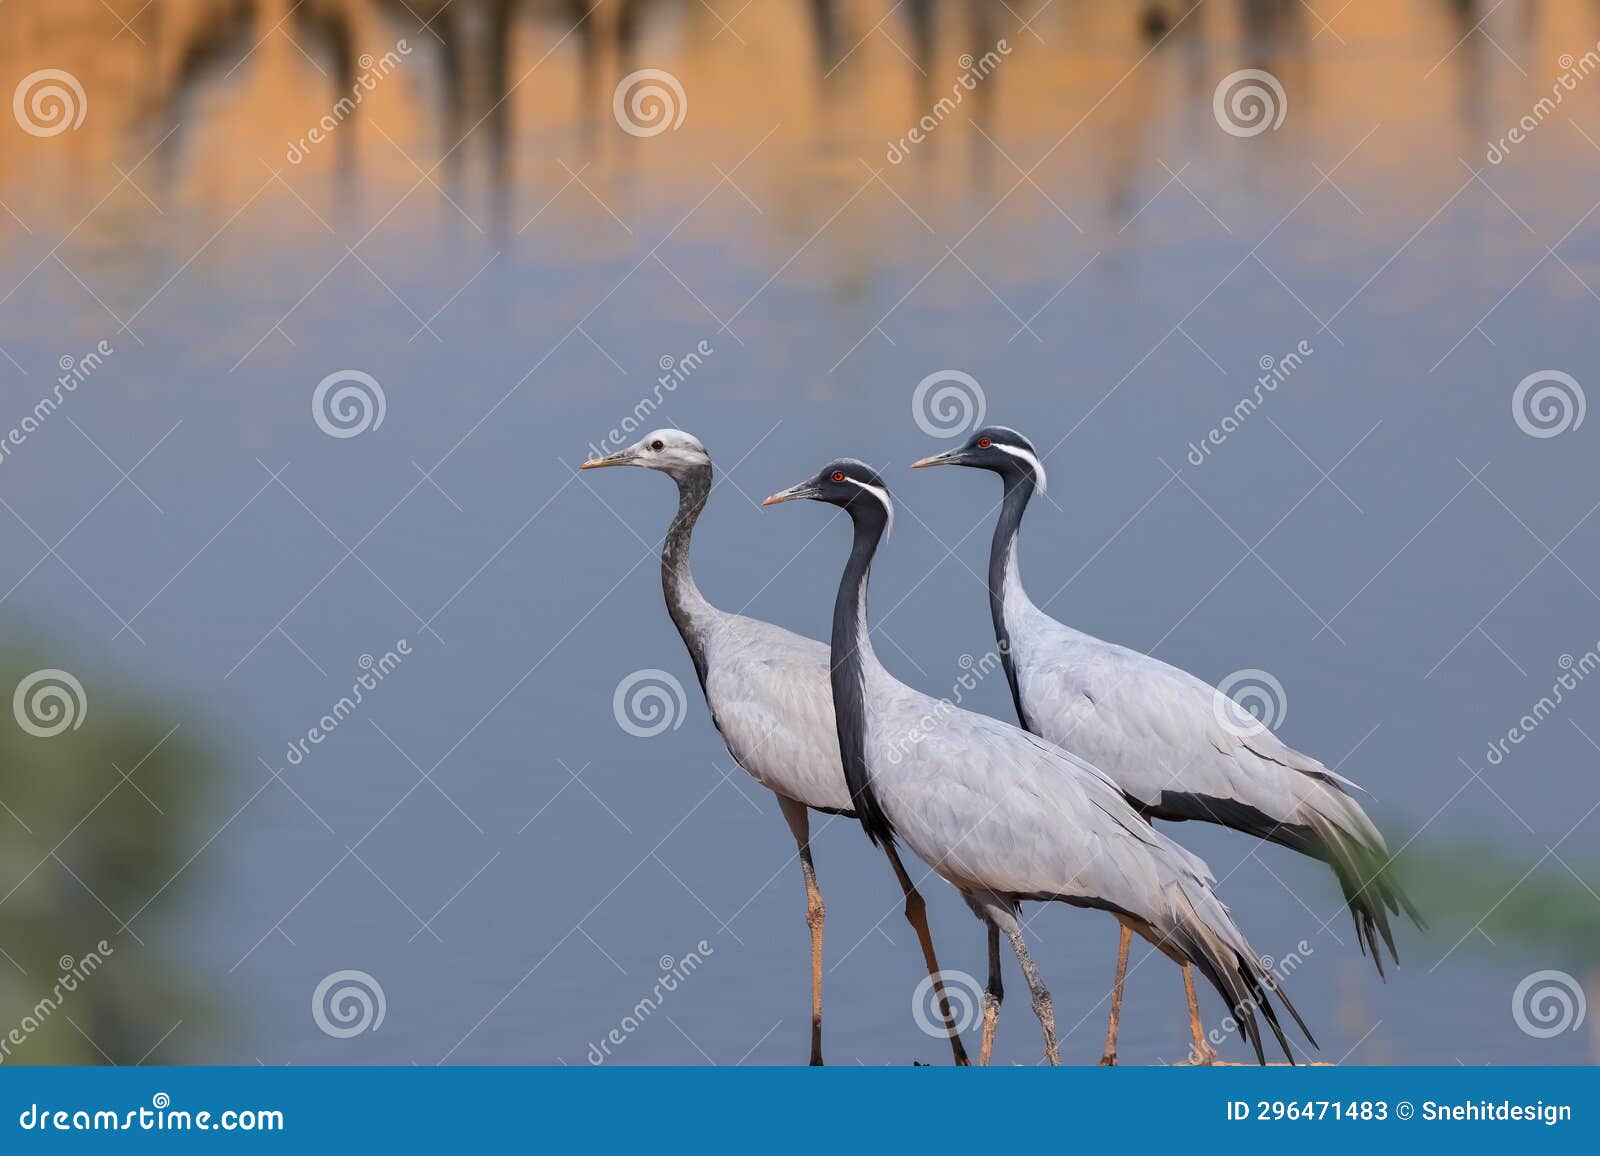 three demoiselle crane birds migrate to rajasthan, india from mongolia